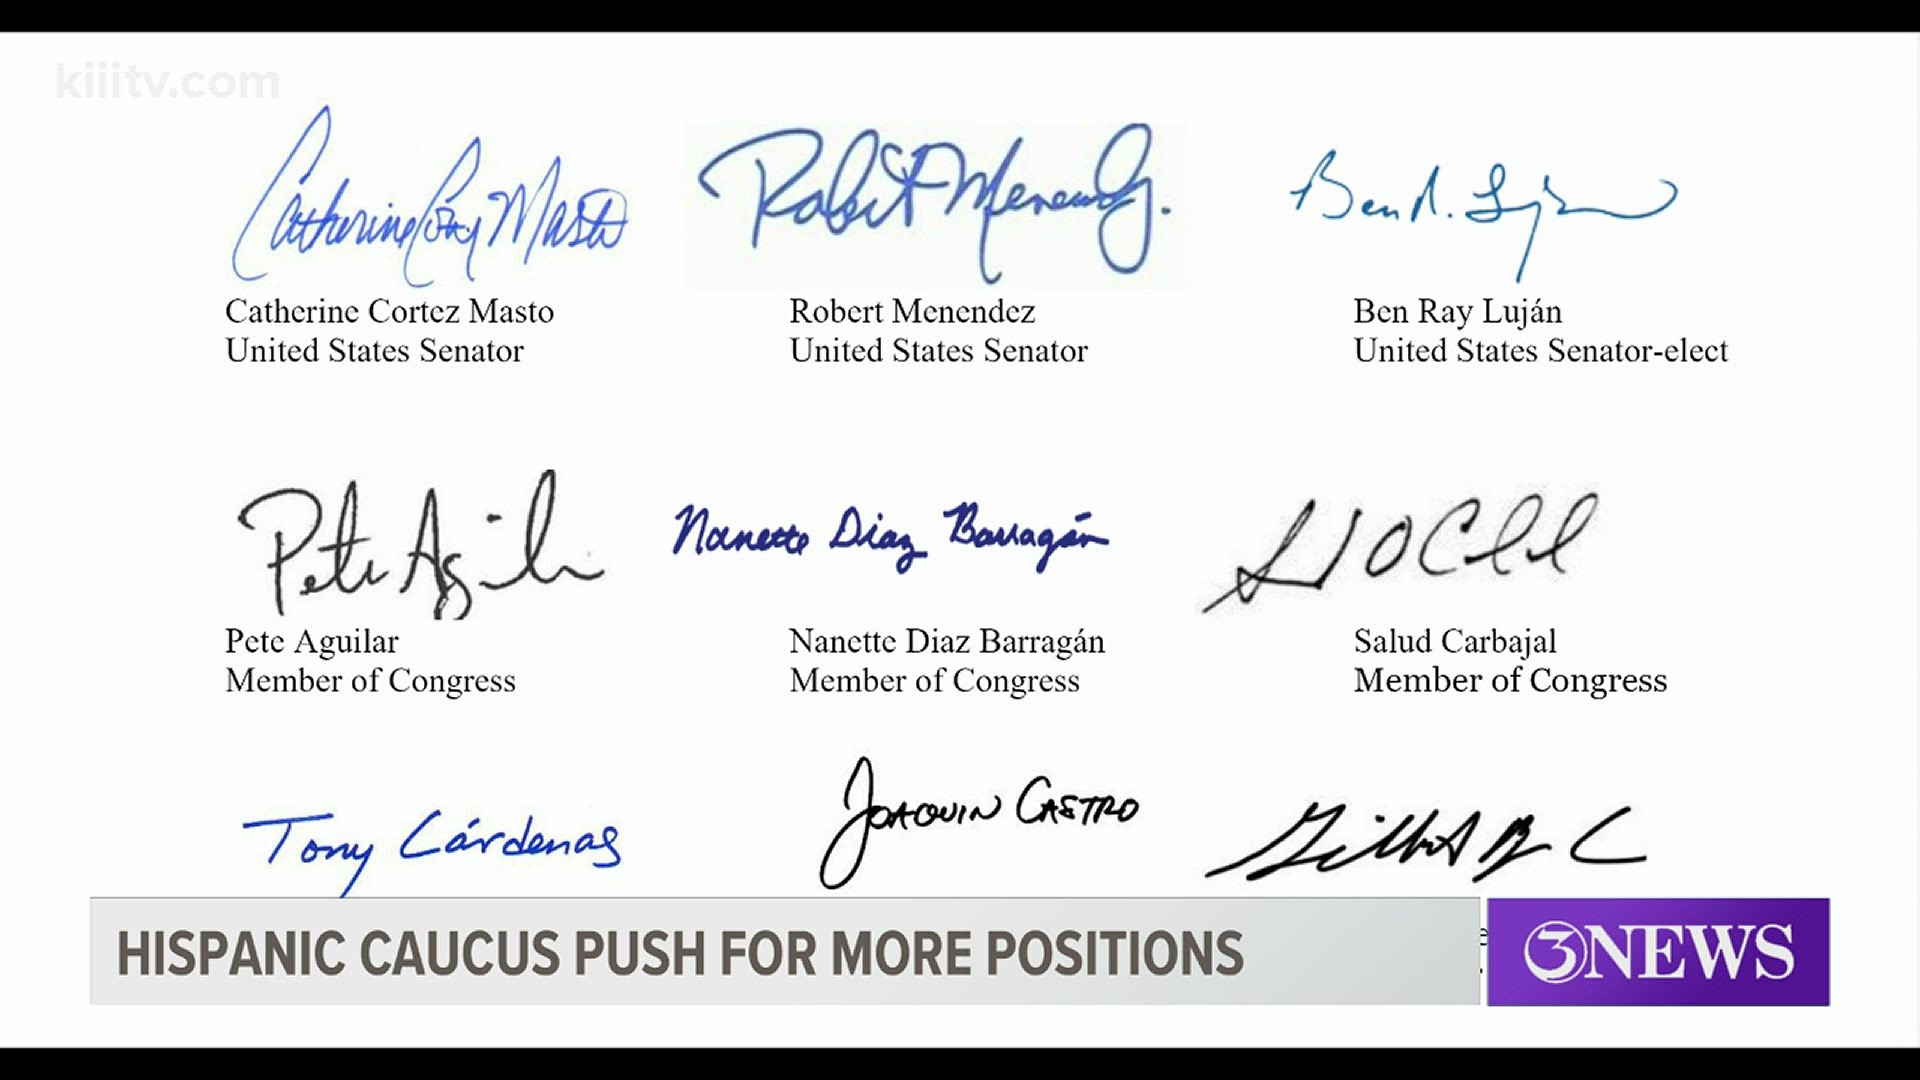 Members of the Congressional Hispanic Caucus wrote a letter to President-elect Joe Biden in the hopes that he would name more Hispanics to his cabinet positions.